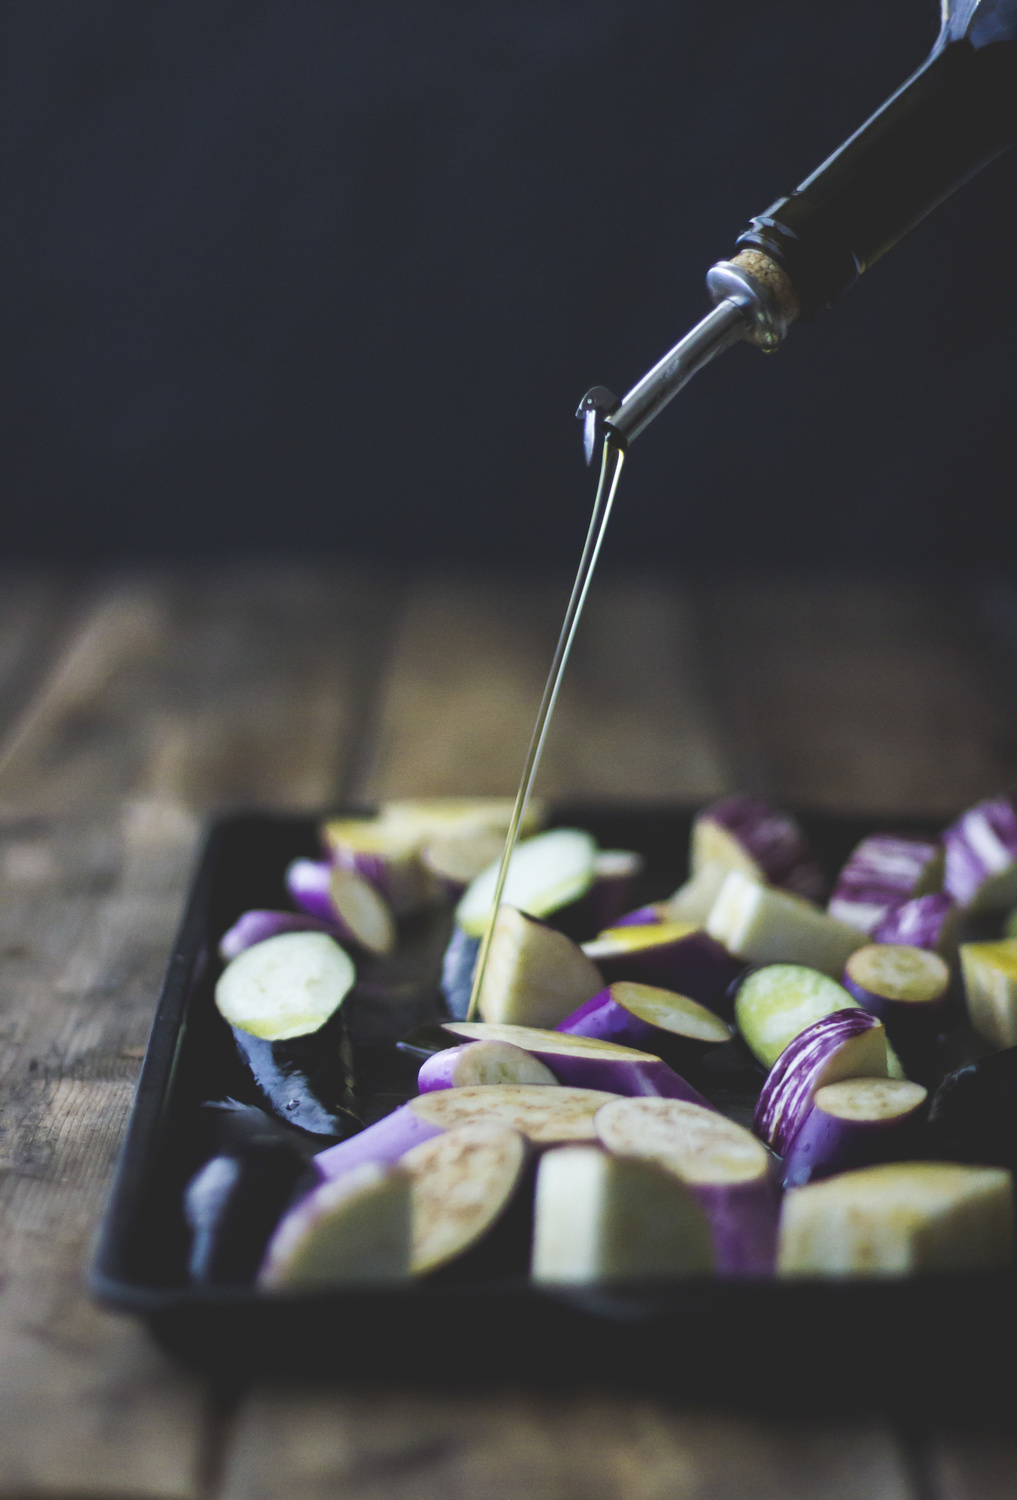 Eggplant. Oil being drixxled over sliced eggplant.